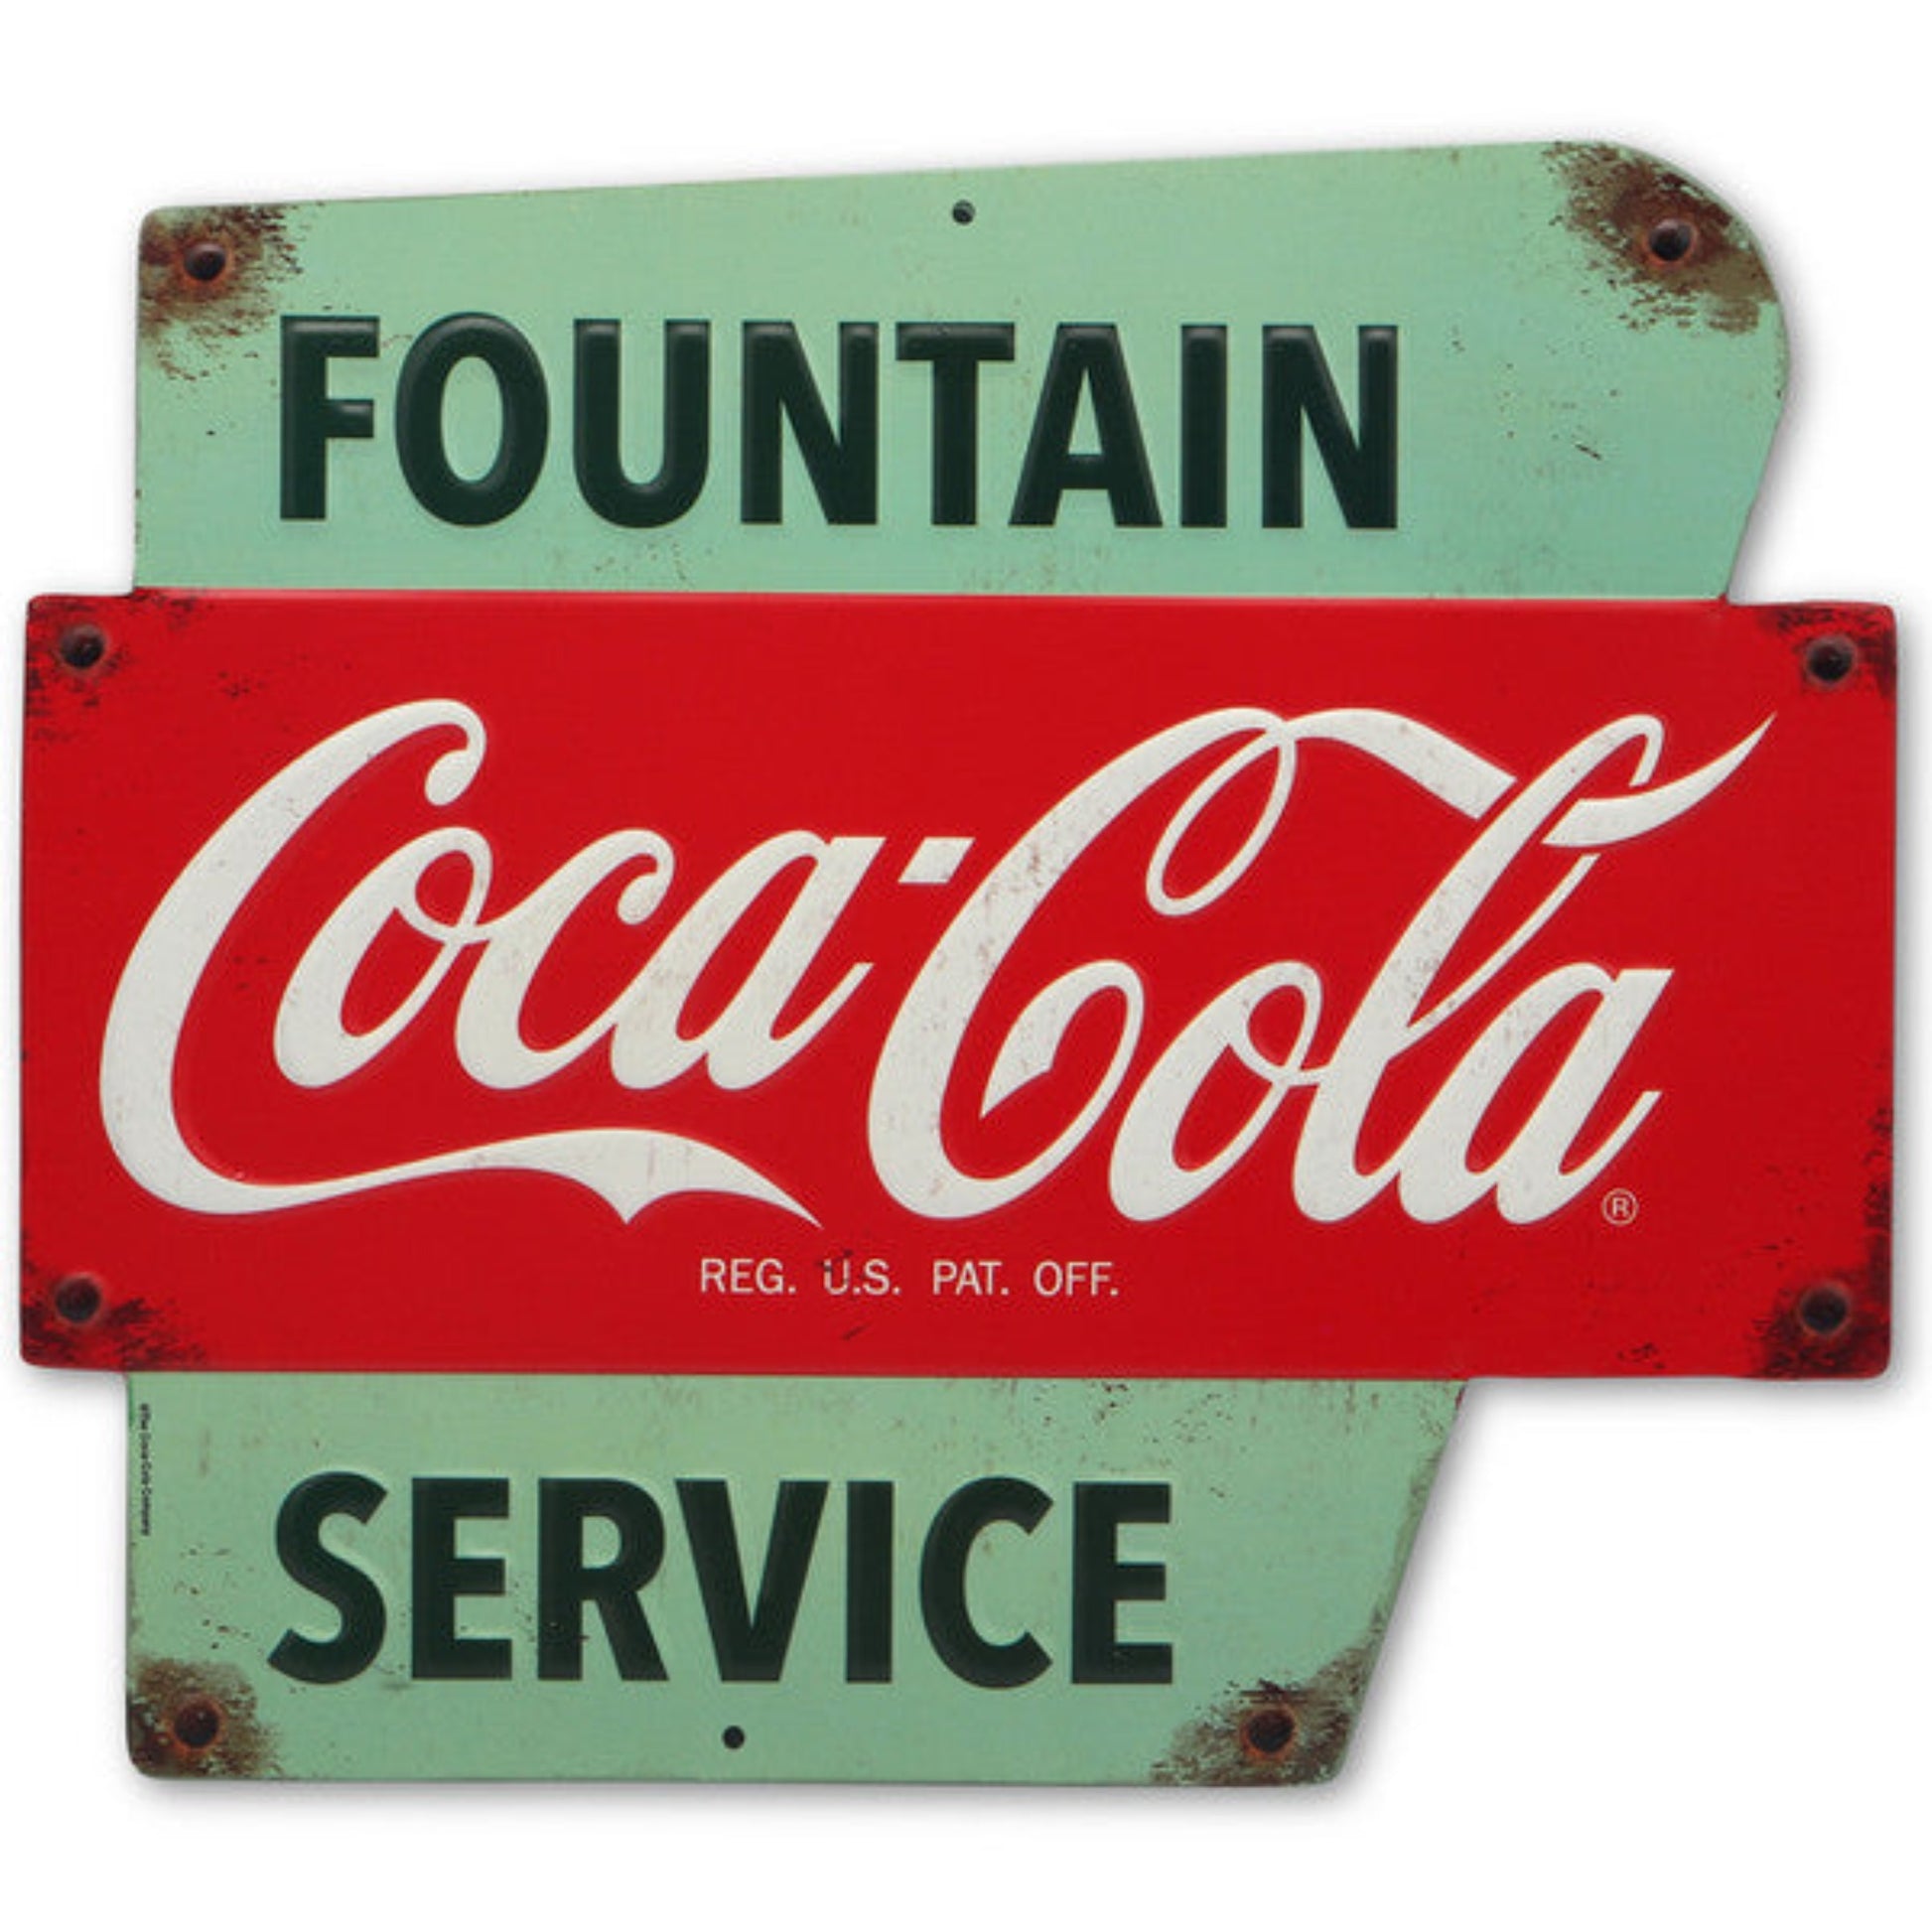 Vintage-style embossed metal sign with the words "Fountain Service" and the iconic red Coca-Cola logo.